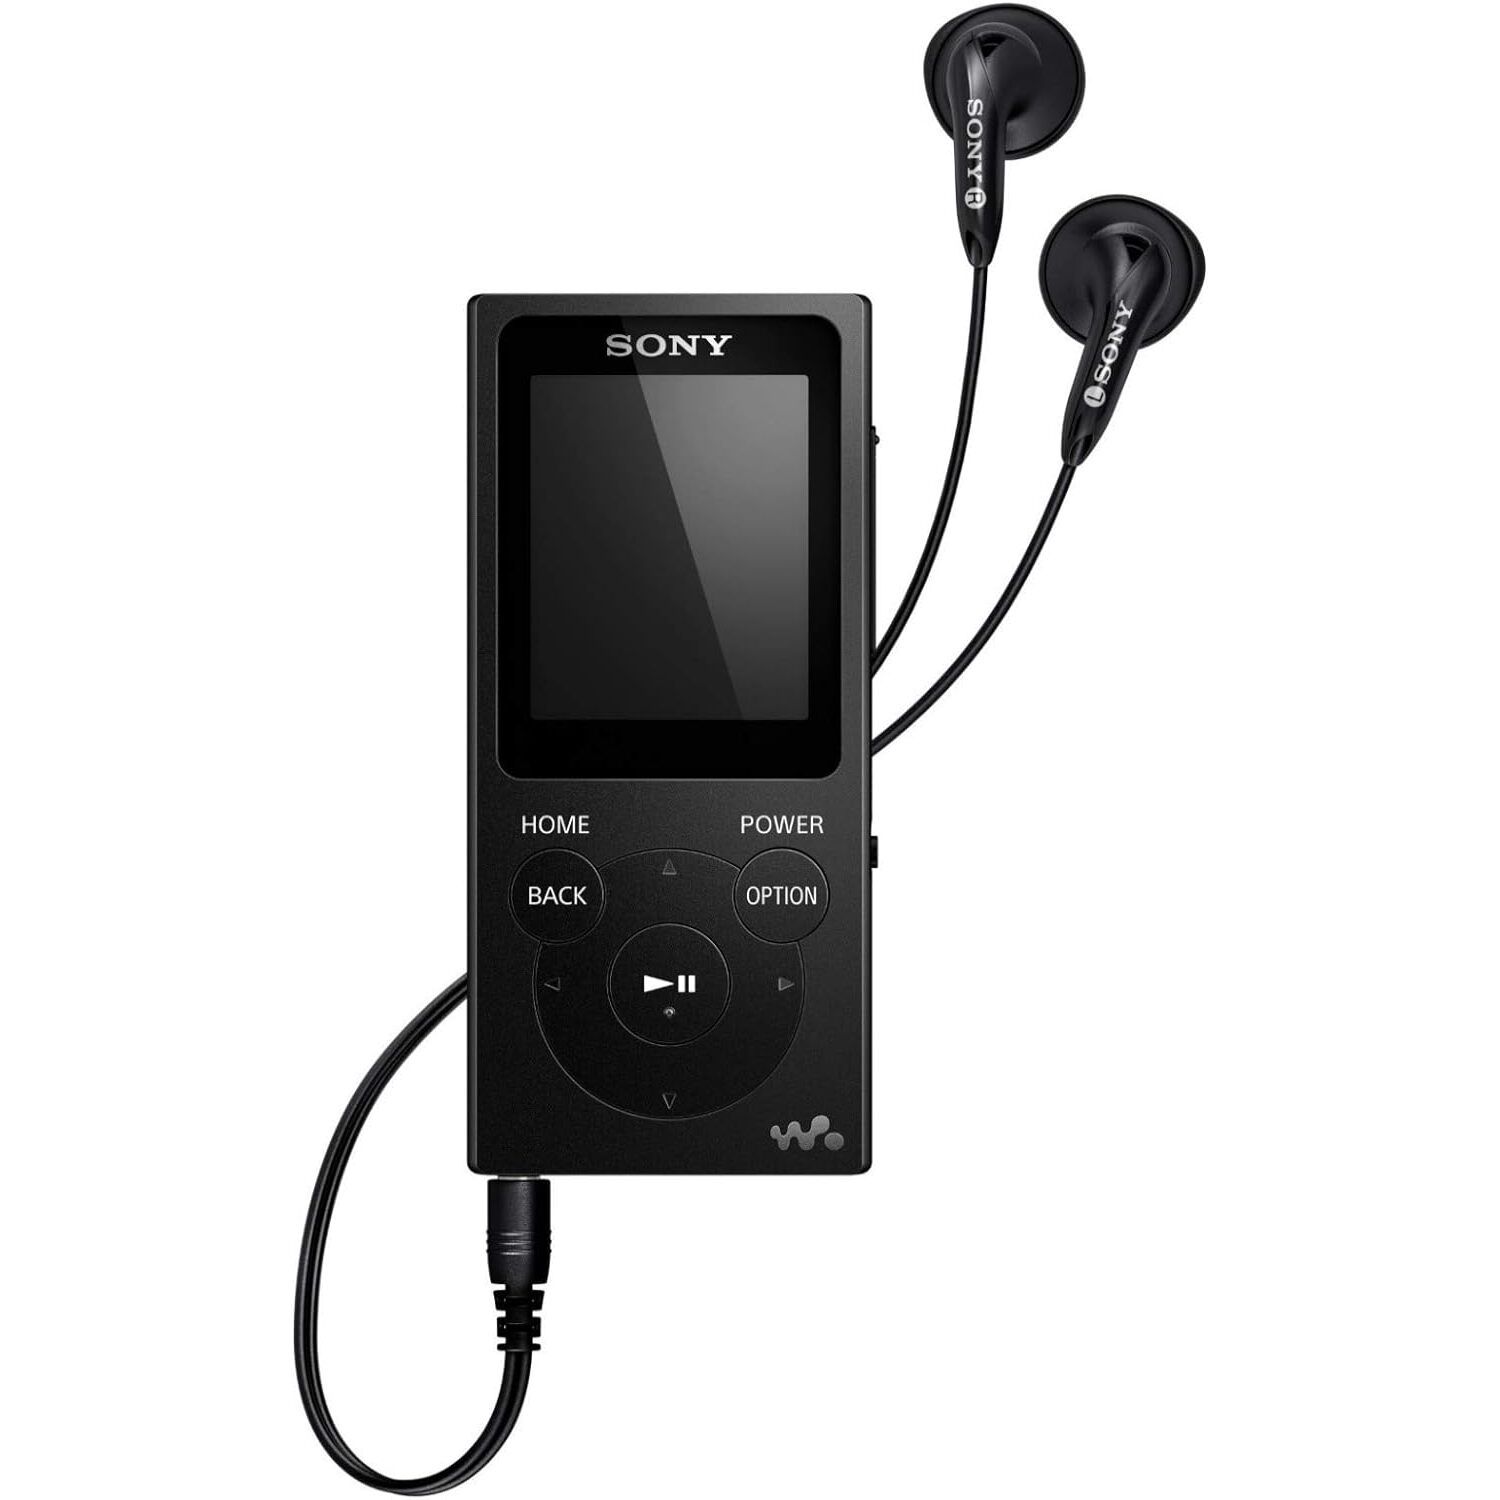 A Sony Walkman with headphones plugged in